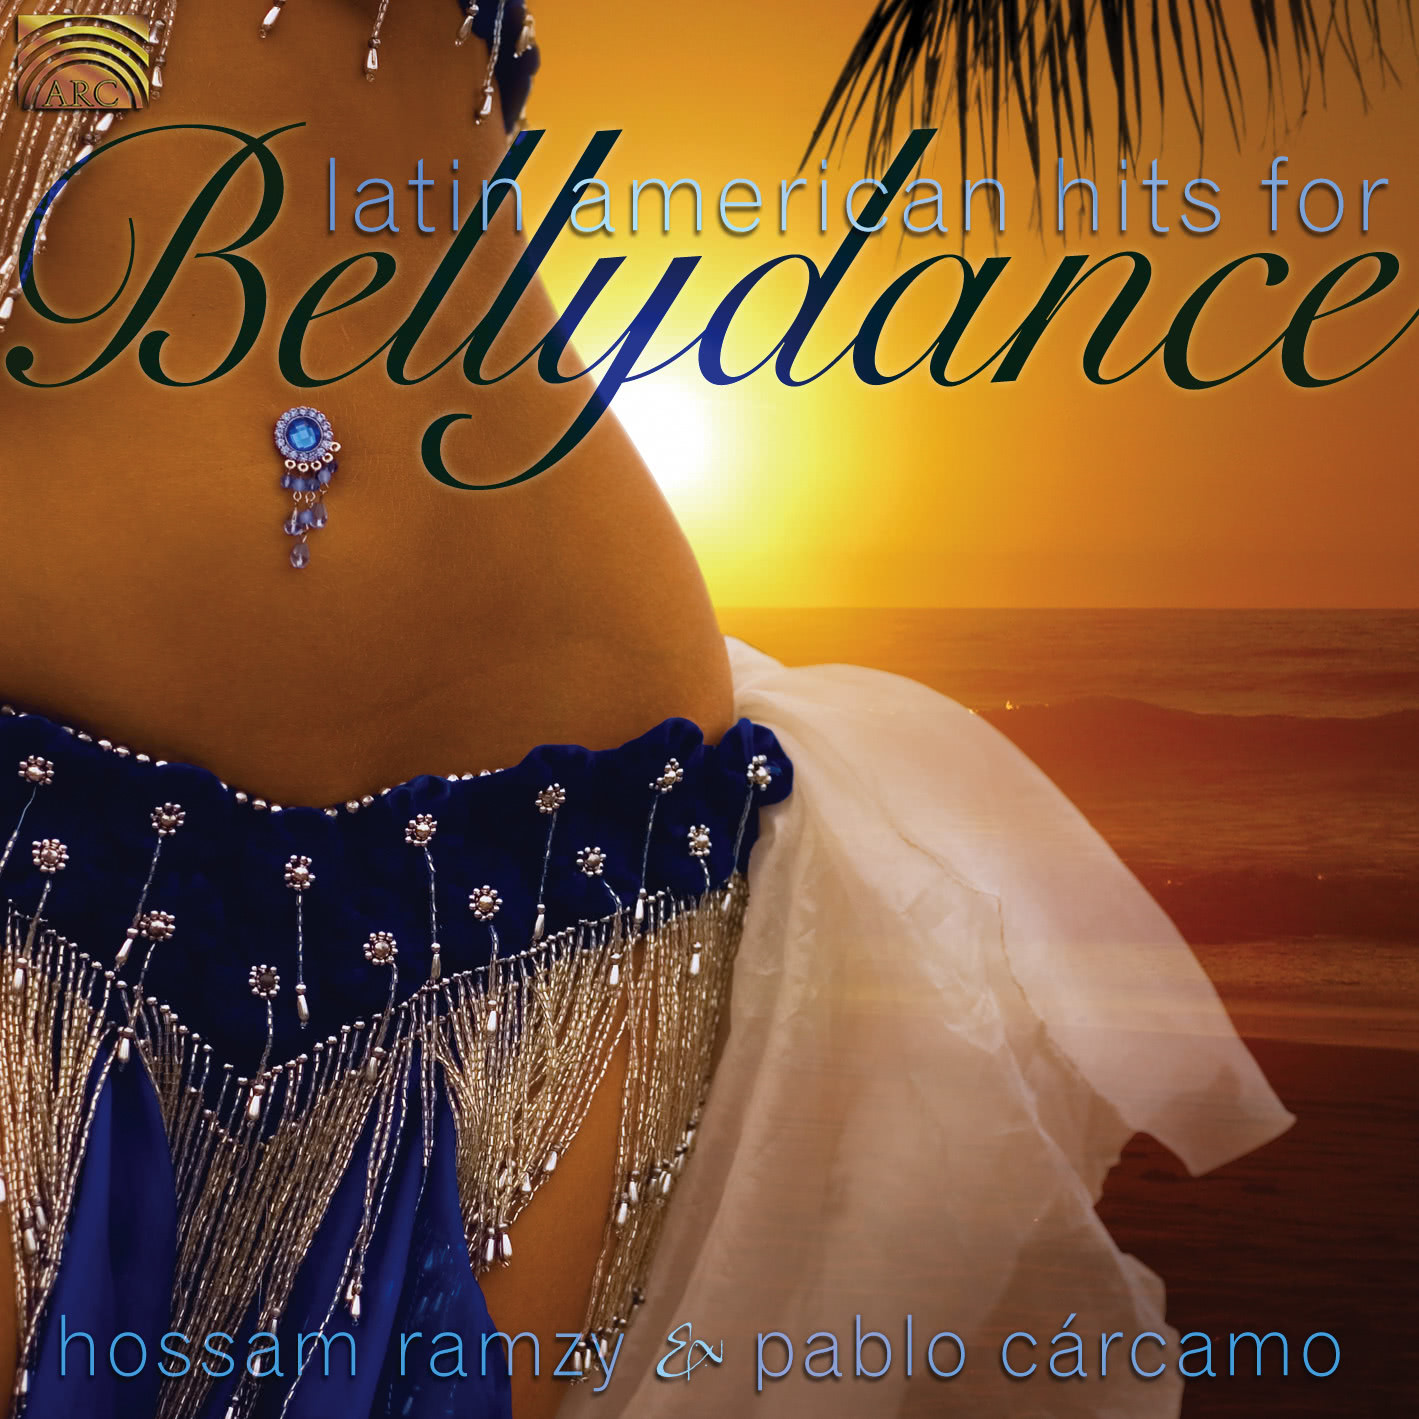 EUCD2059 Latin American Hits for Bellydance